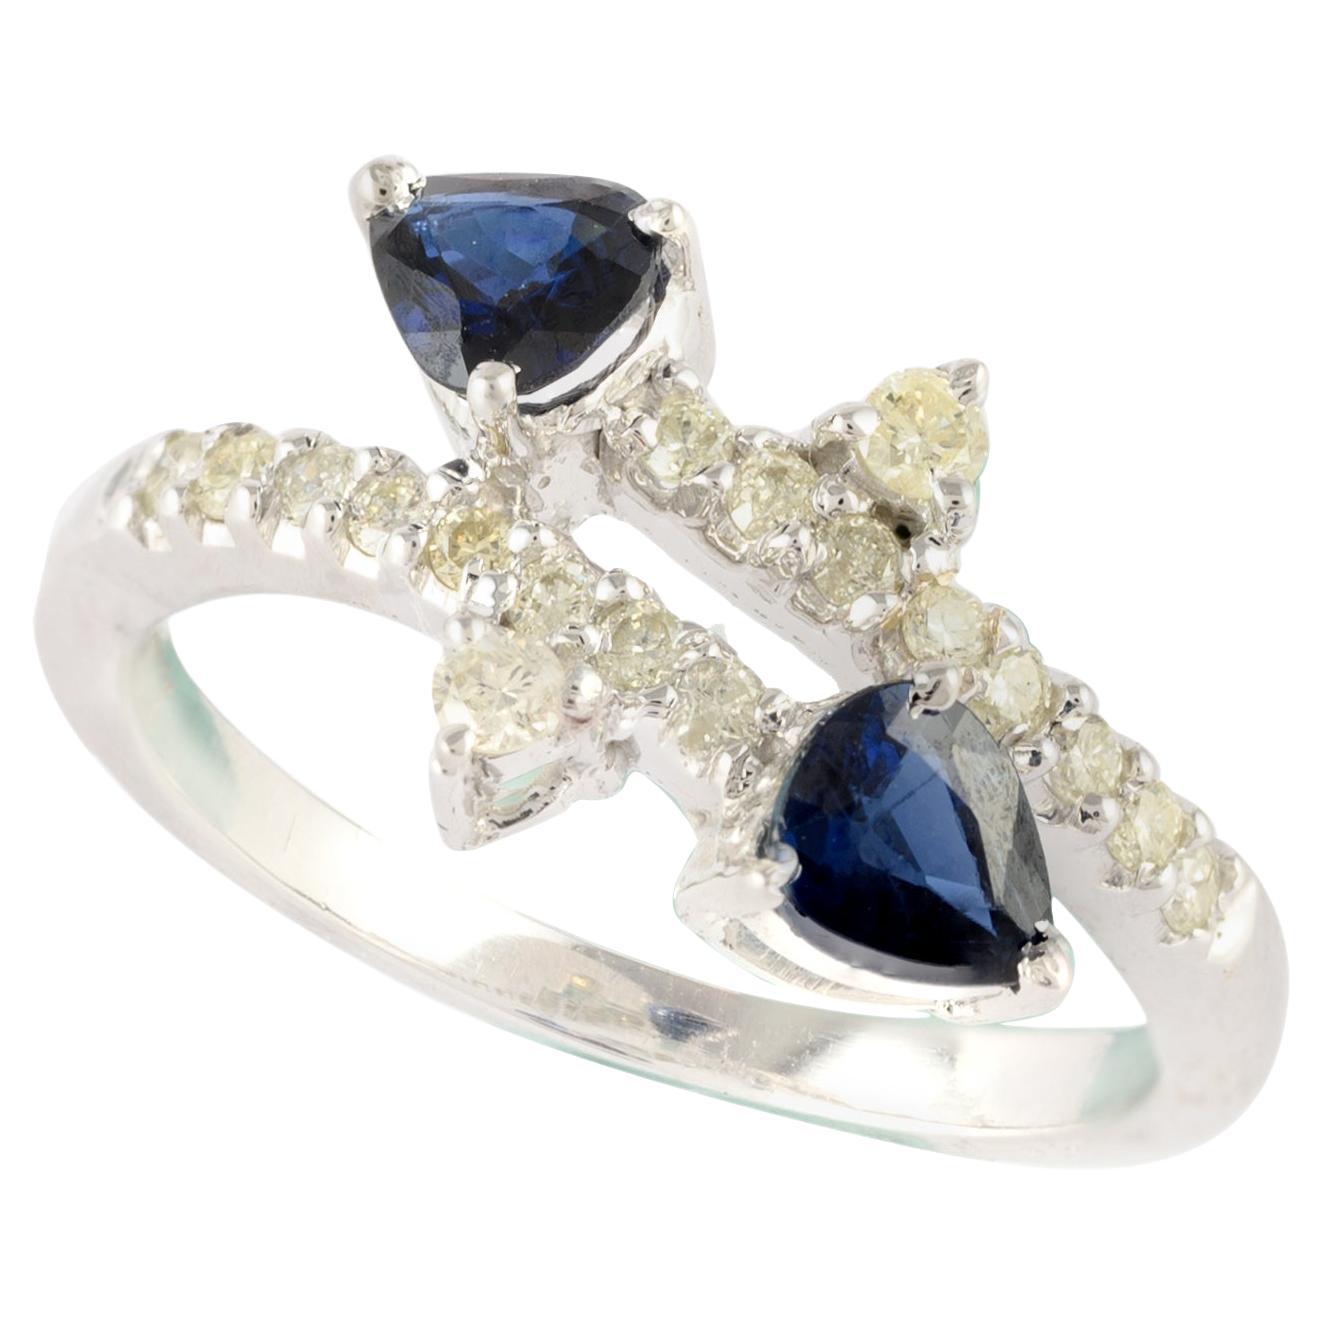 For Sale:  Minimalist Blue Sapphire Diamond Ring in 14K Solid White Gold